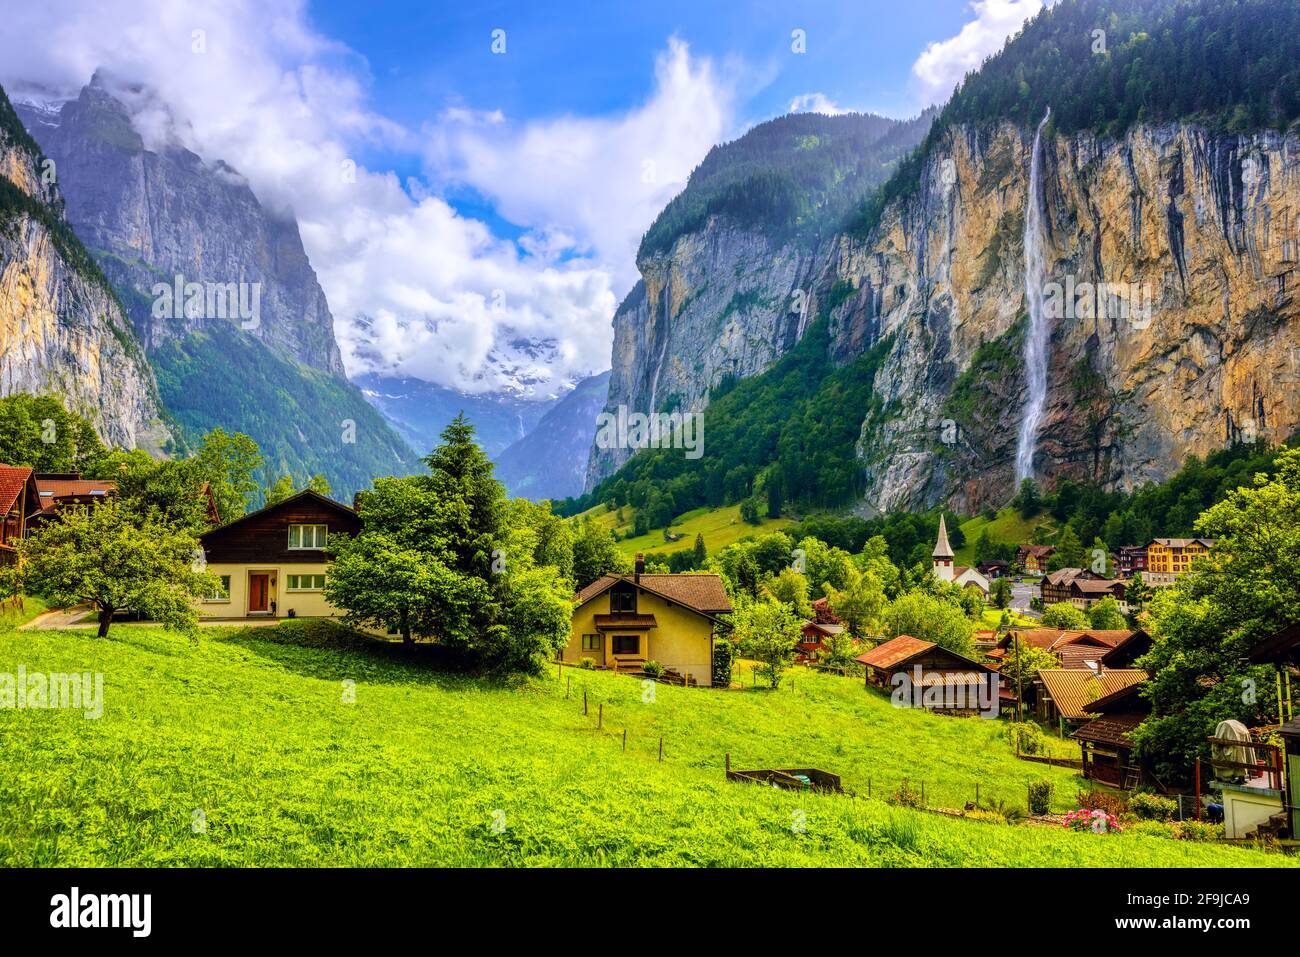 Lauterbrunnen village, famous for its historical architecture, many waterfalls and spectacular setting in an Alps mountains valley, Bernese Highlands, Stock Photo